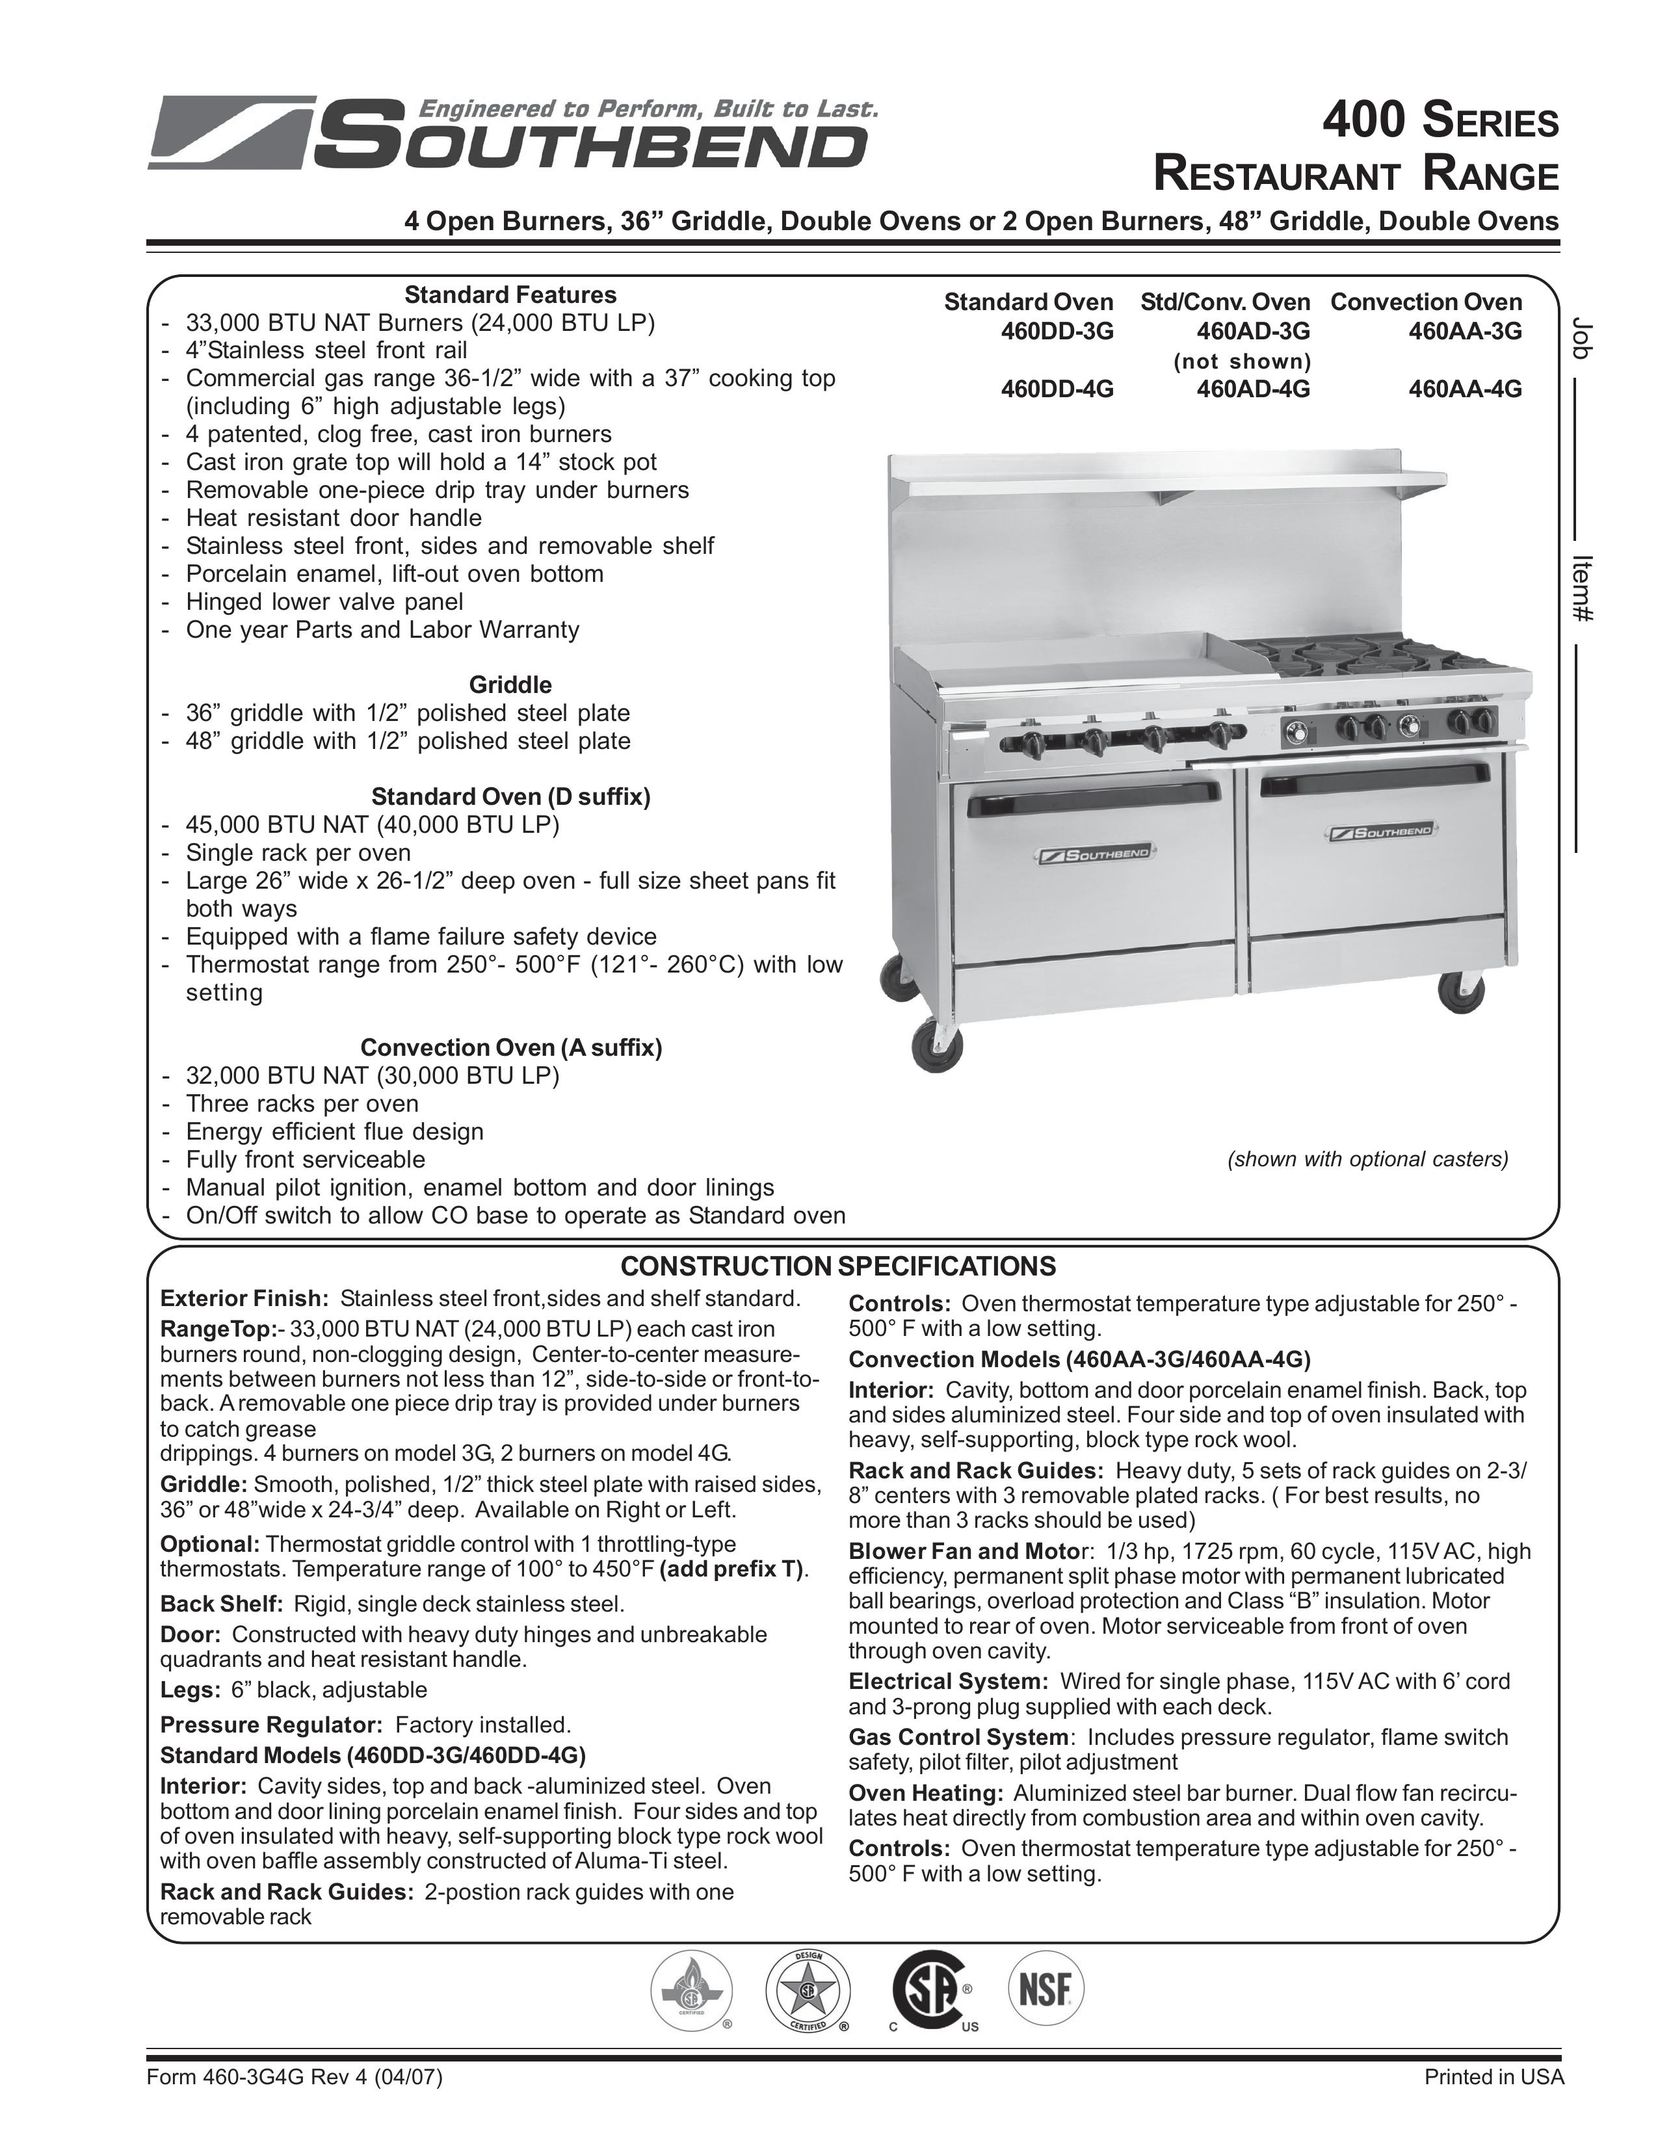 Southbend 460AD-4G Convection Oven User Manual